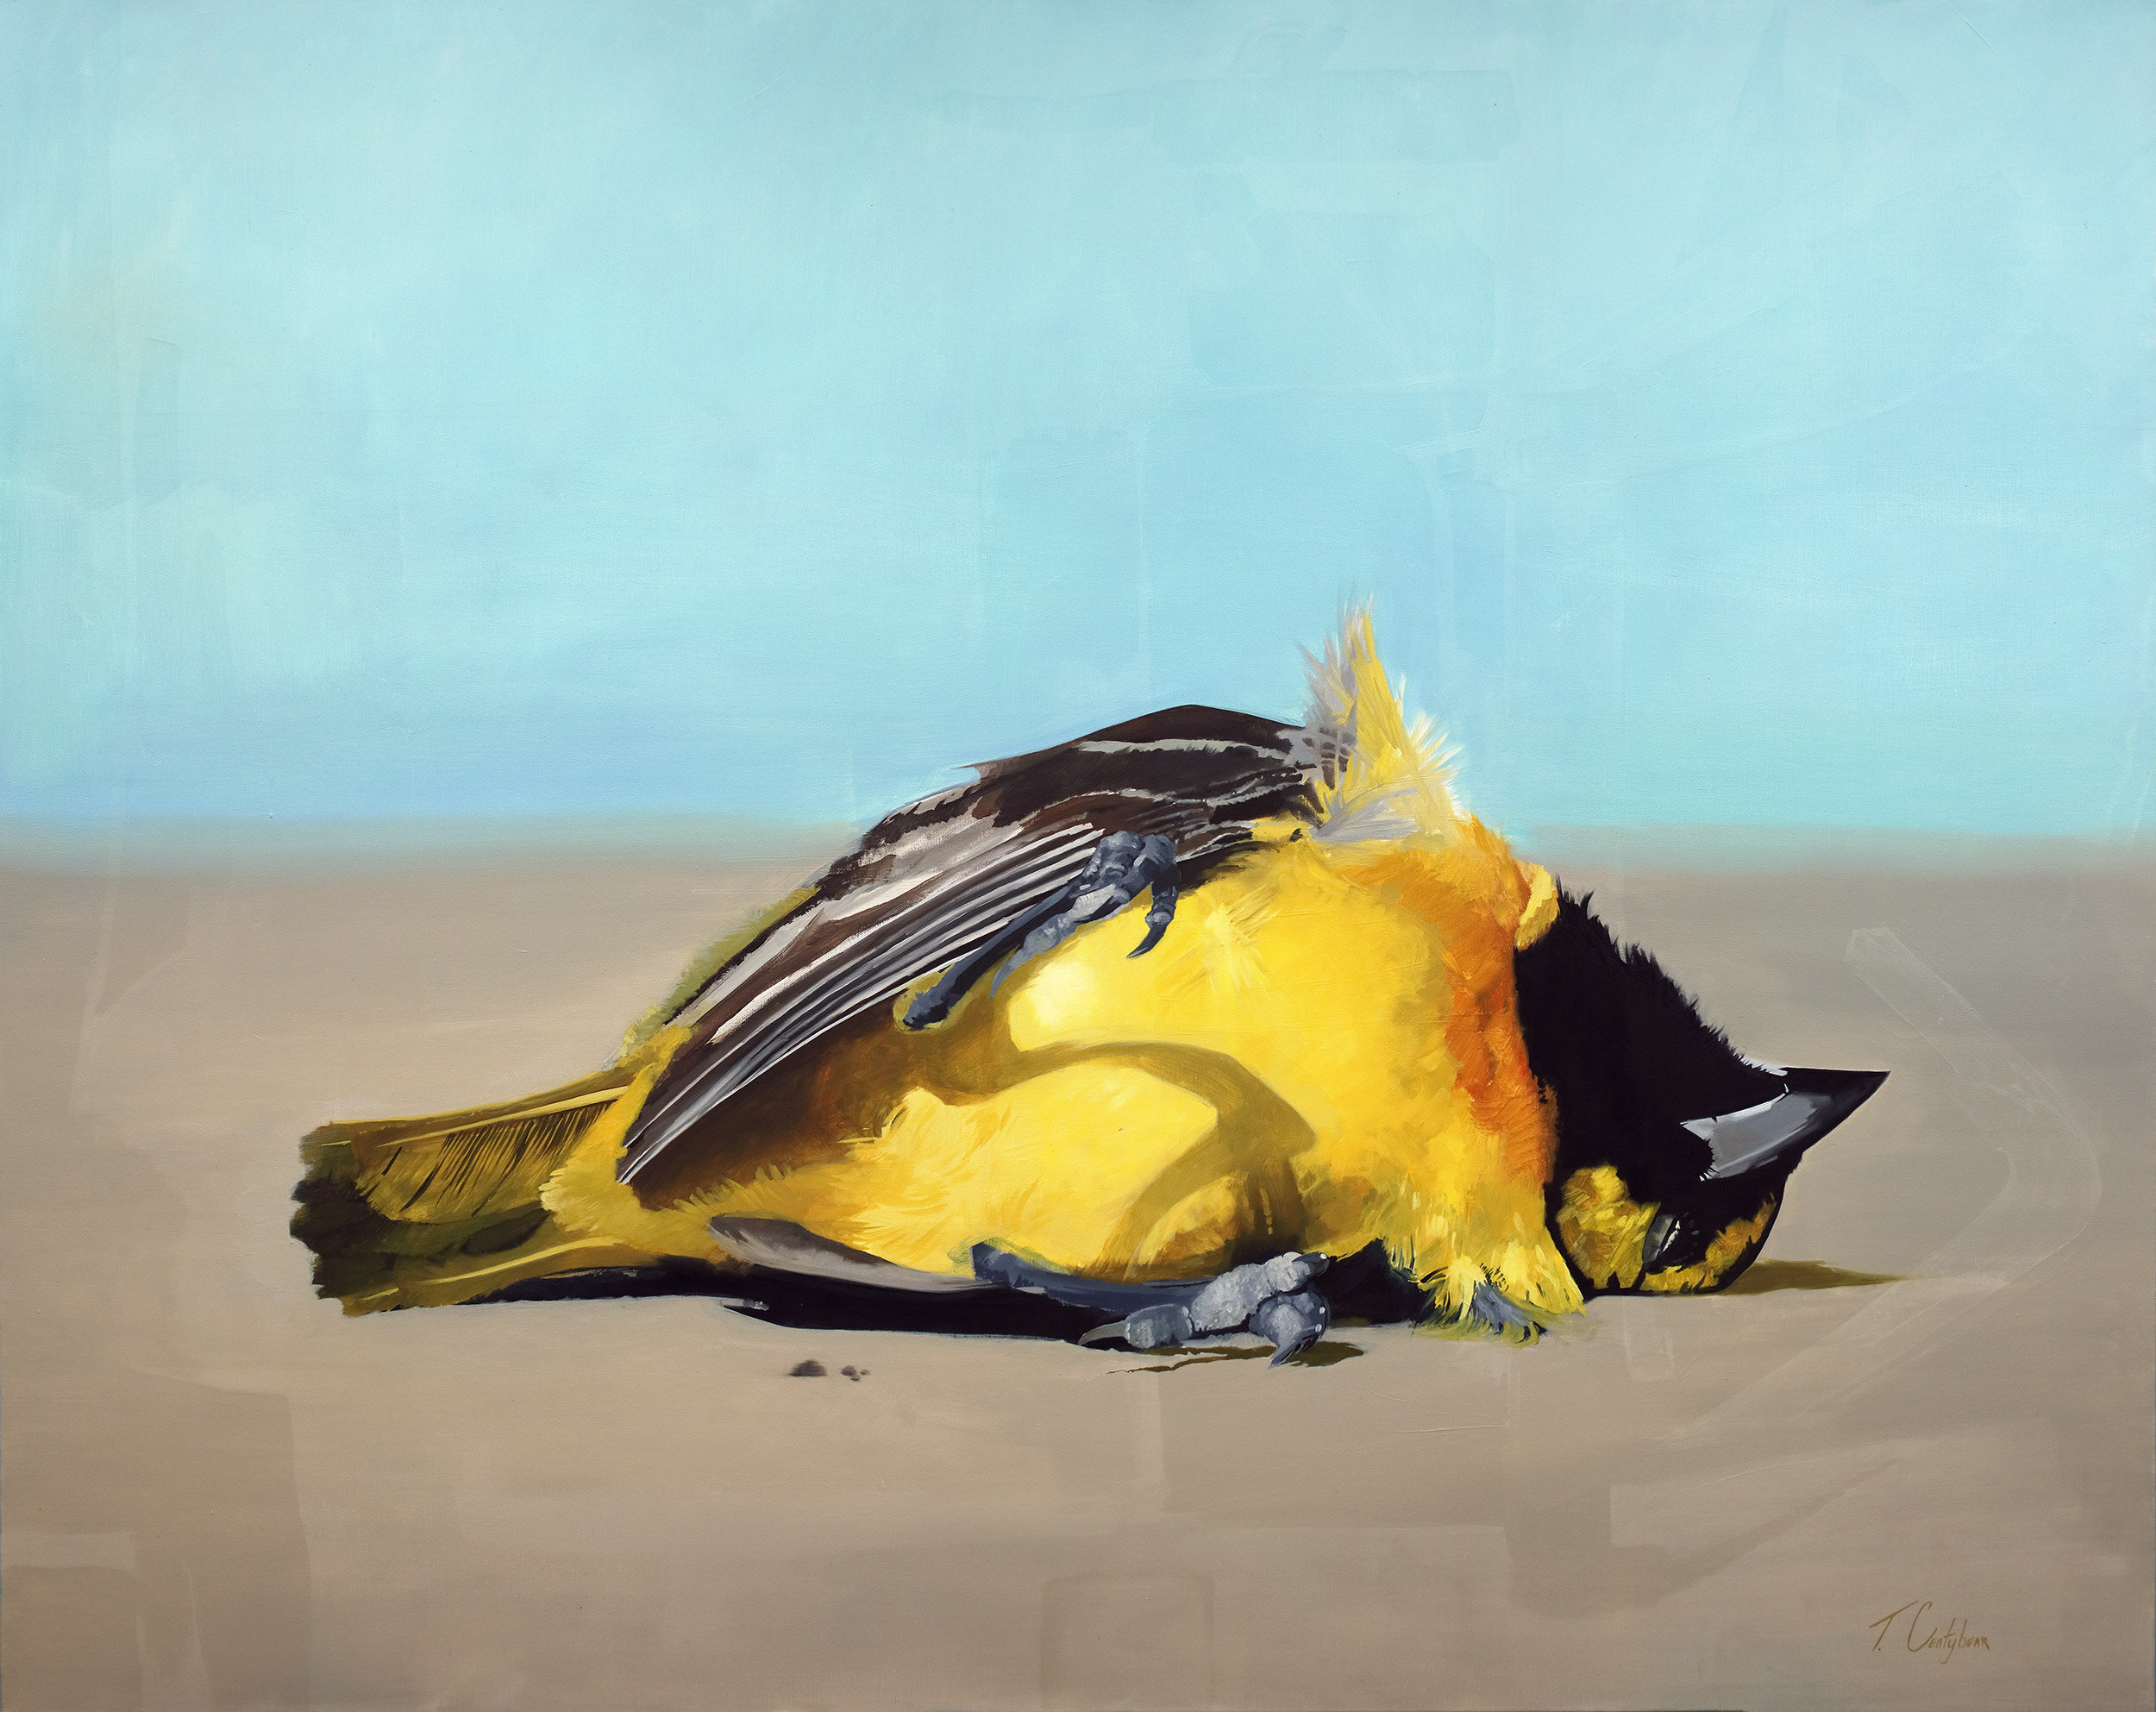   Grounded Goldfinch  2016 Oil on canvas 45x60 inches 